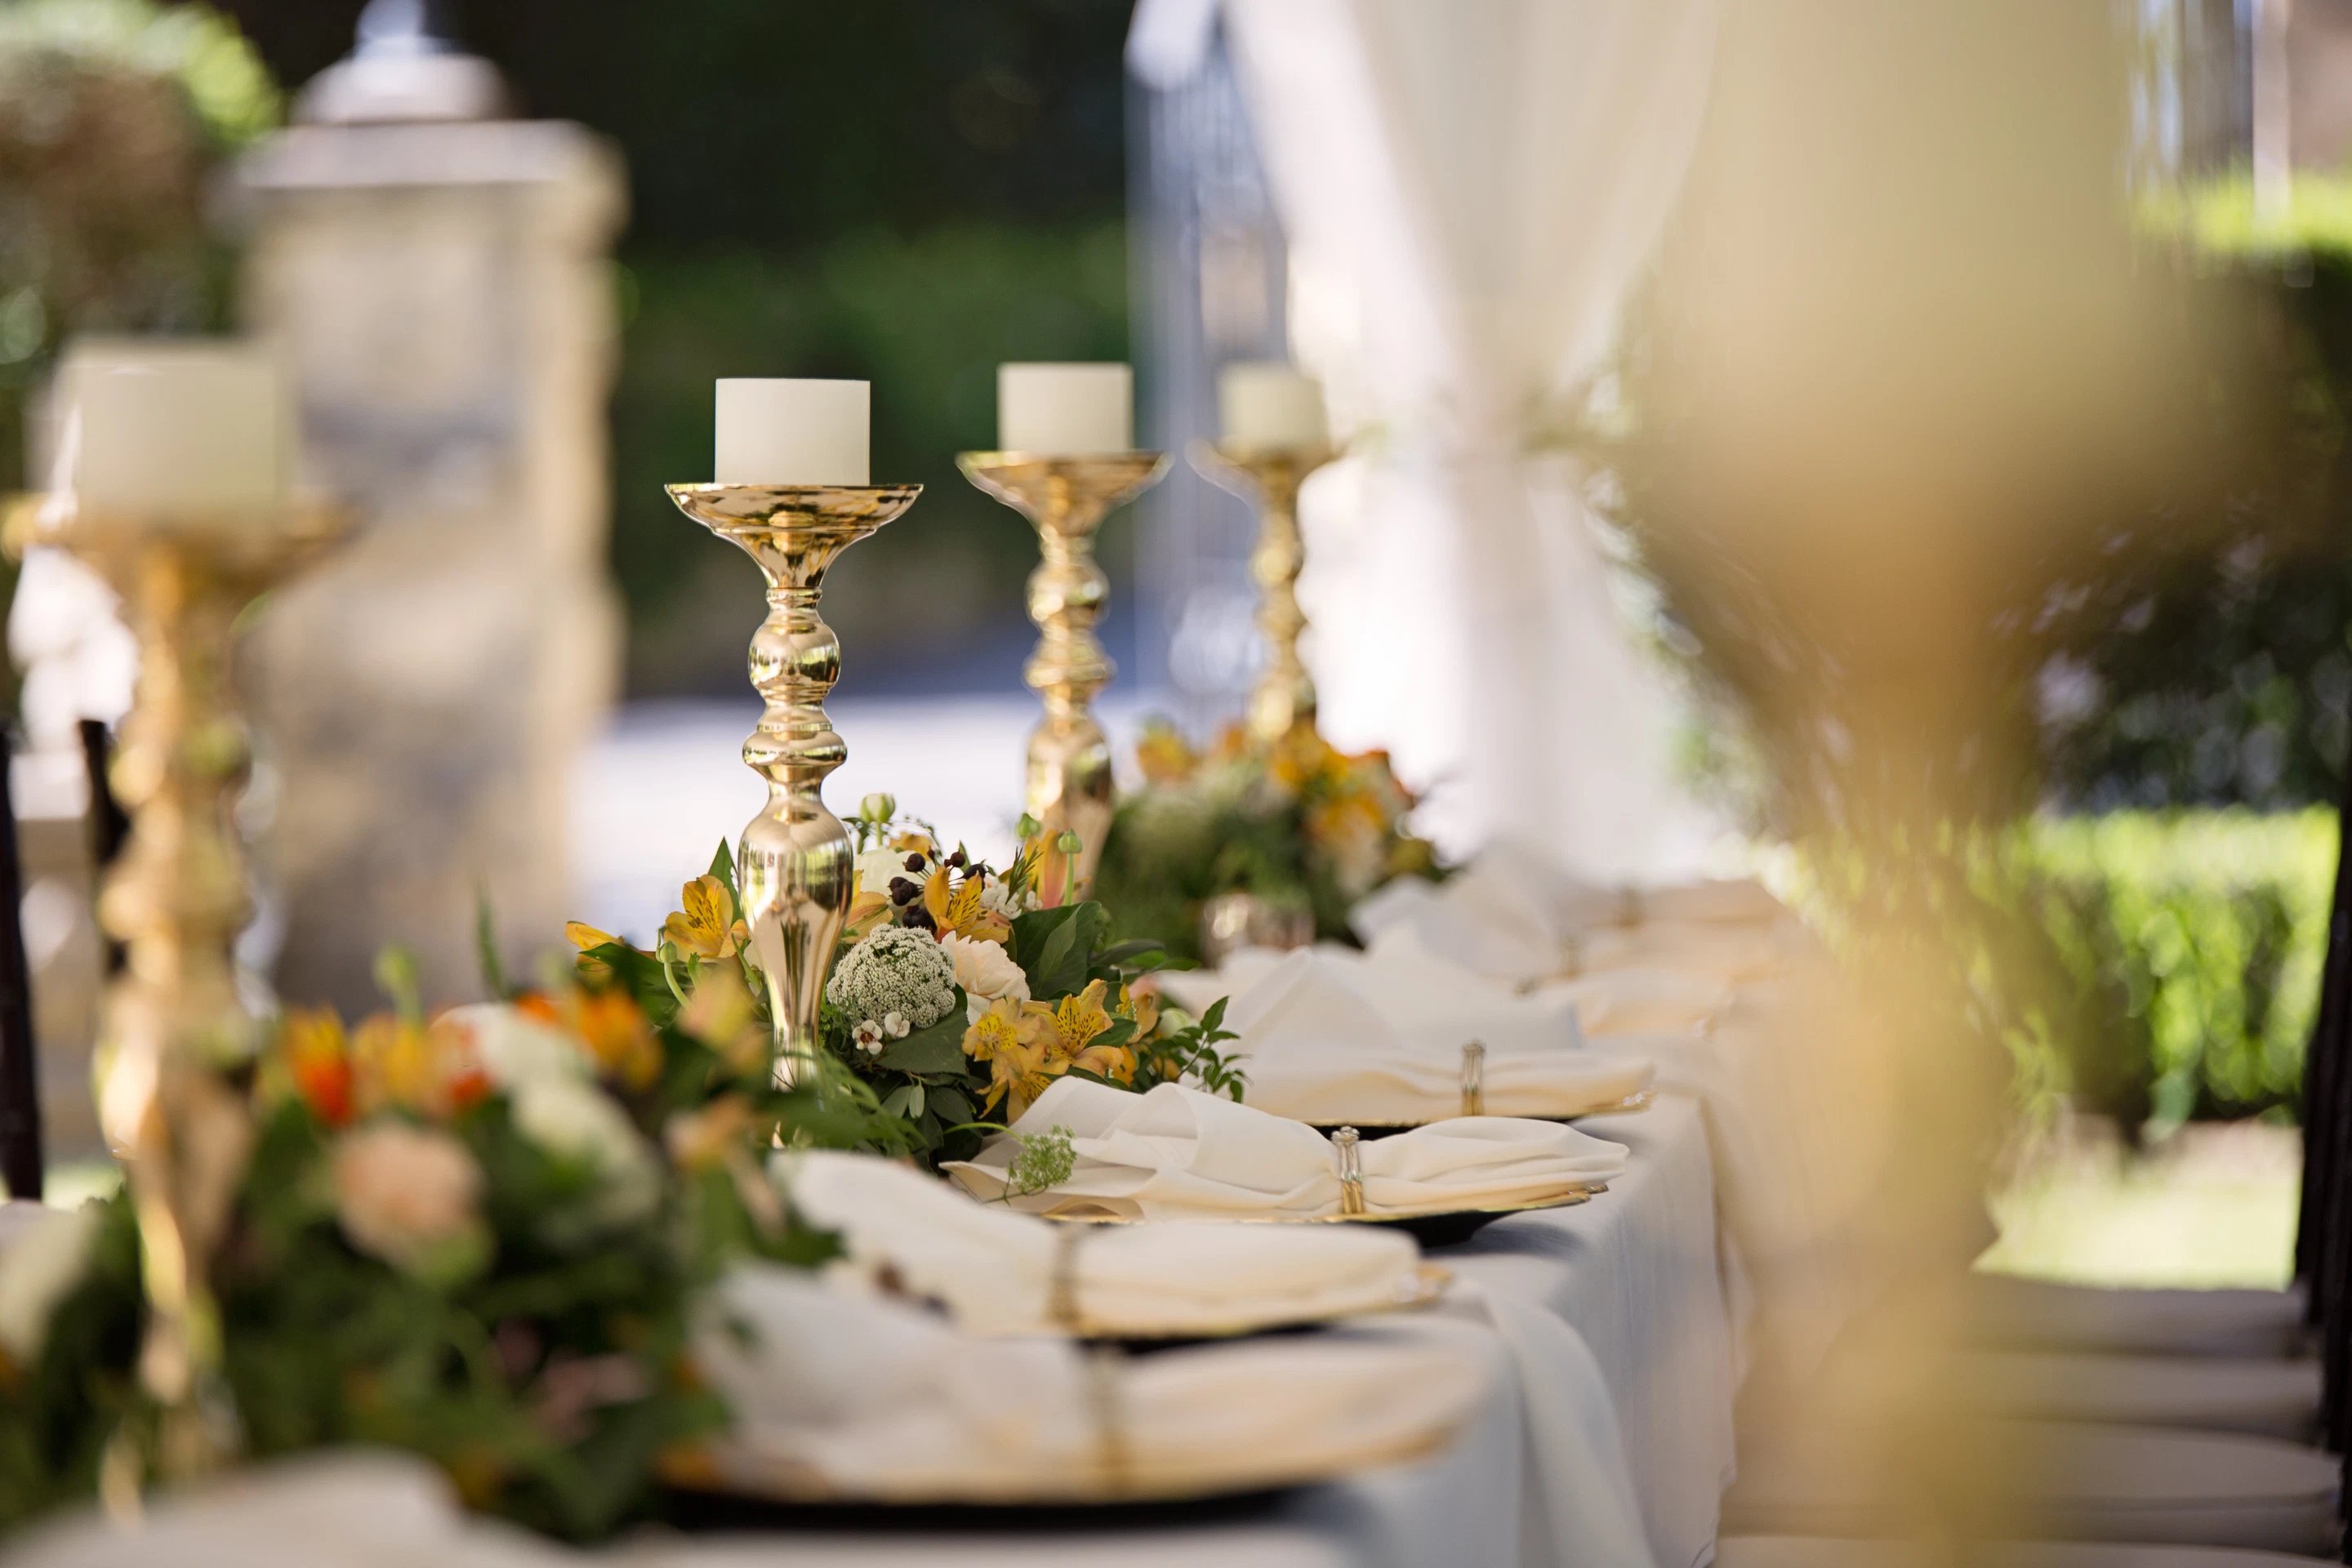 279/Chateau_le_Prieure/Mariage/selective-focus-of-candlesticks-on-table-with-wedding-set-up-1128783.jpg